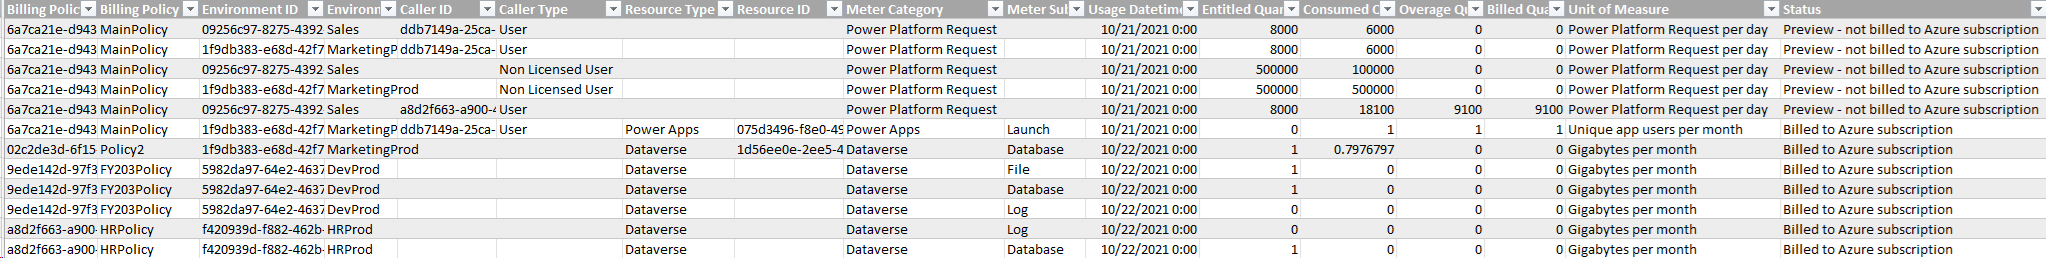 Sample detailed usage report